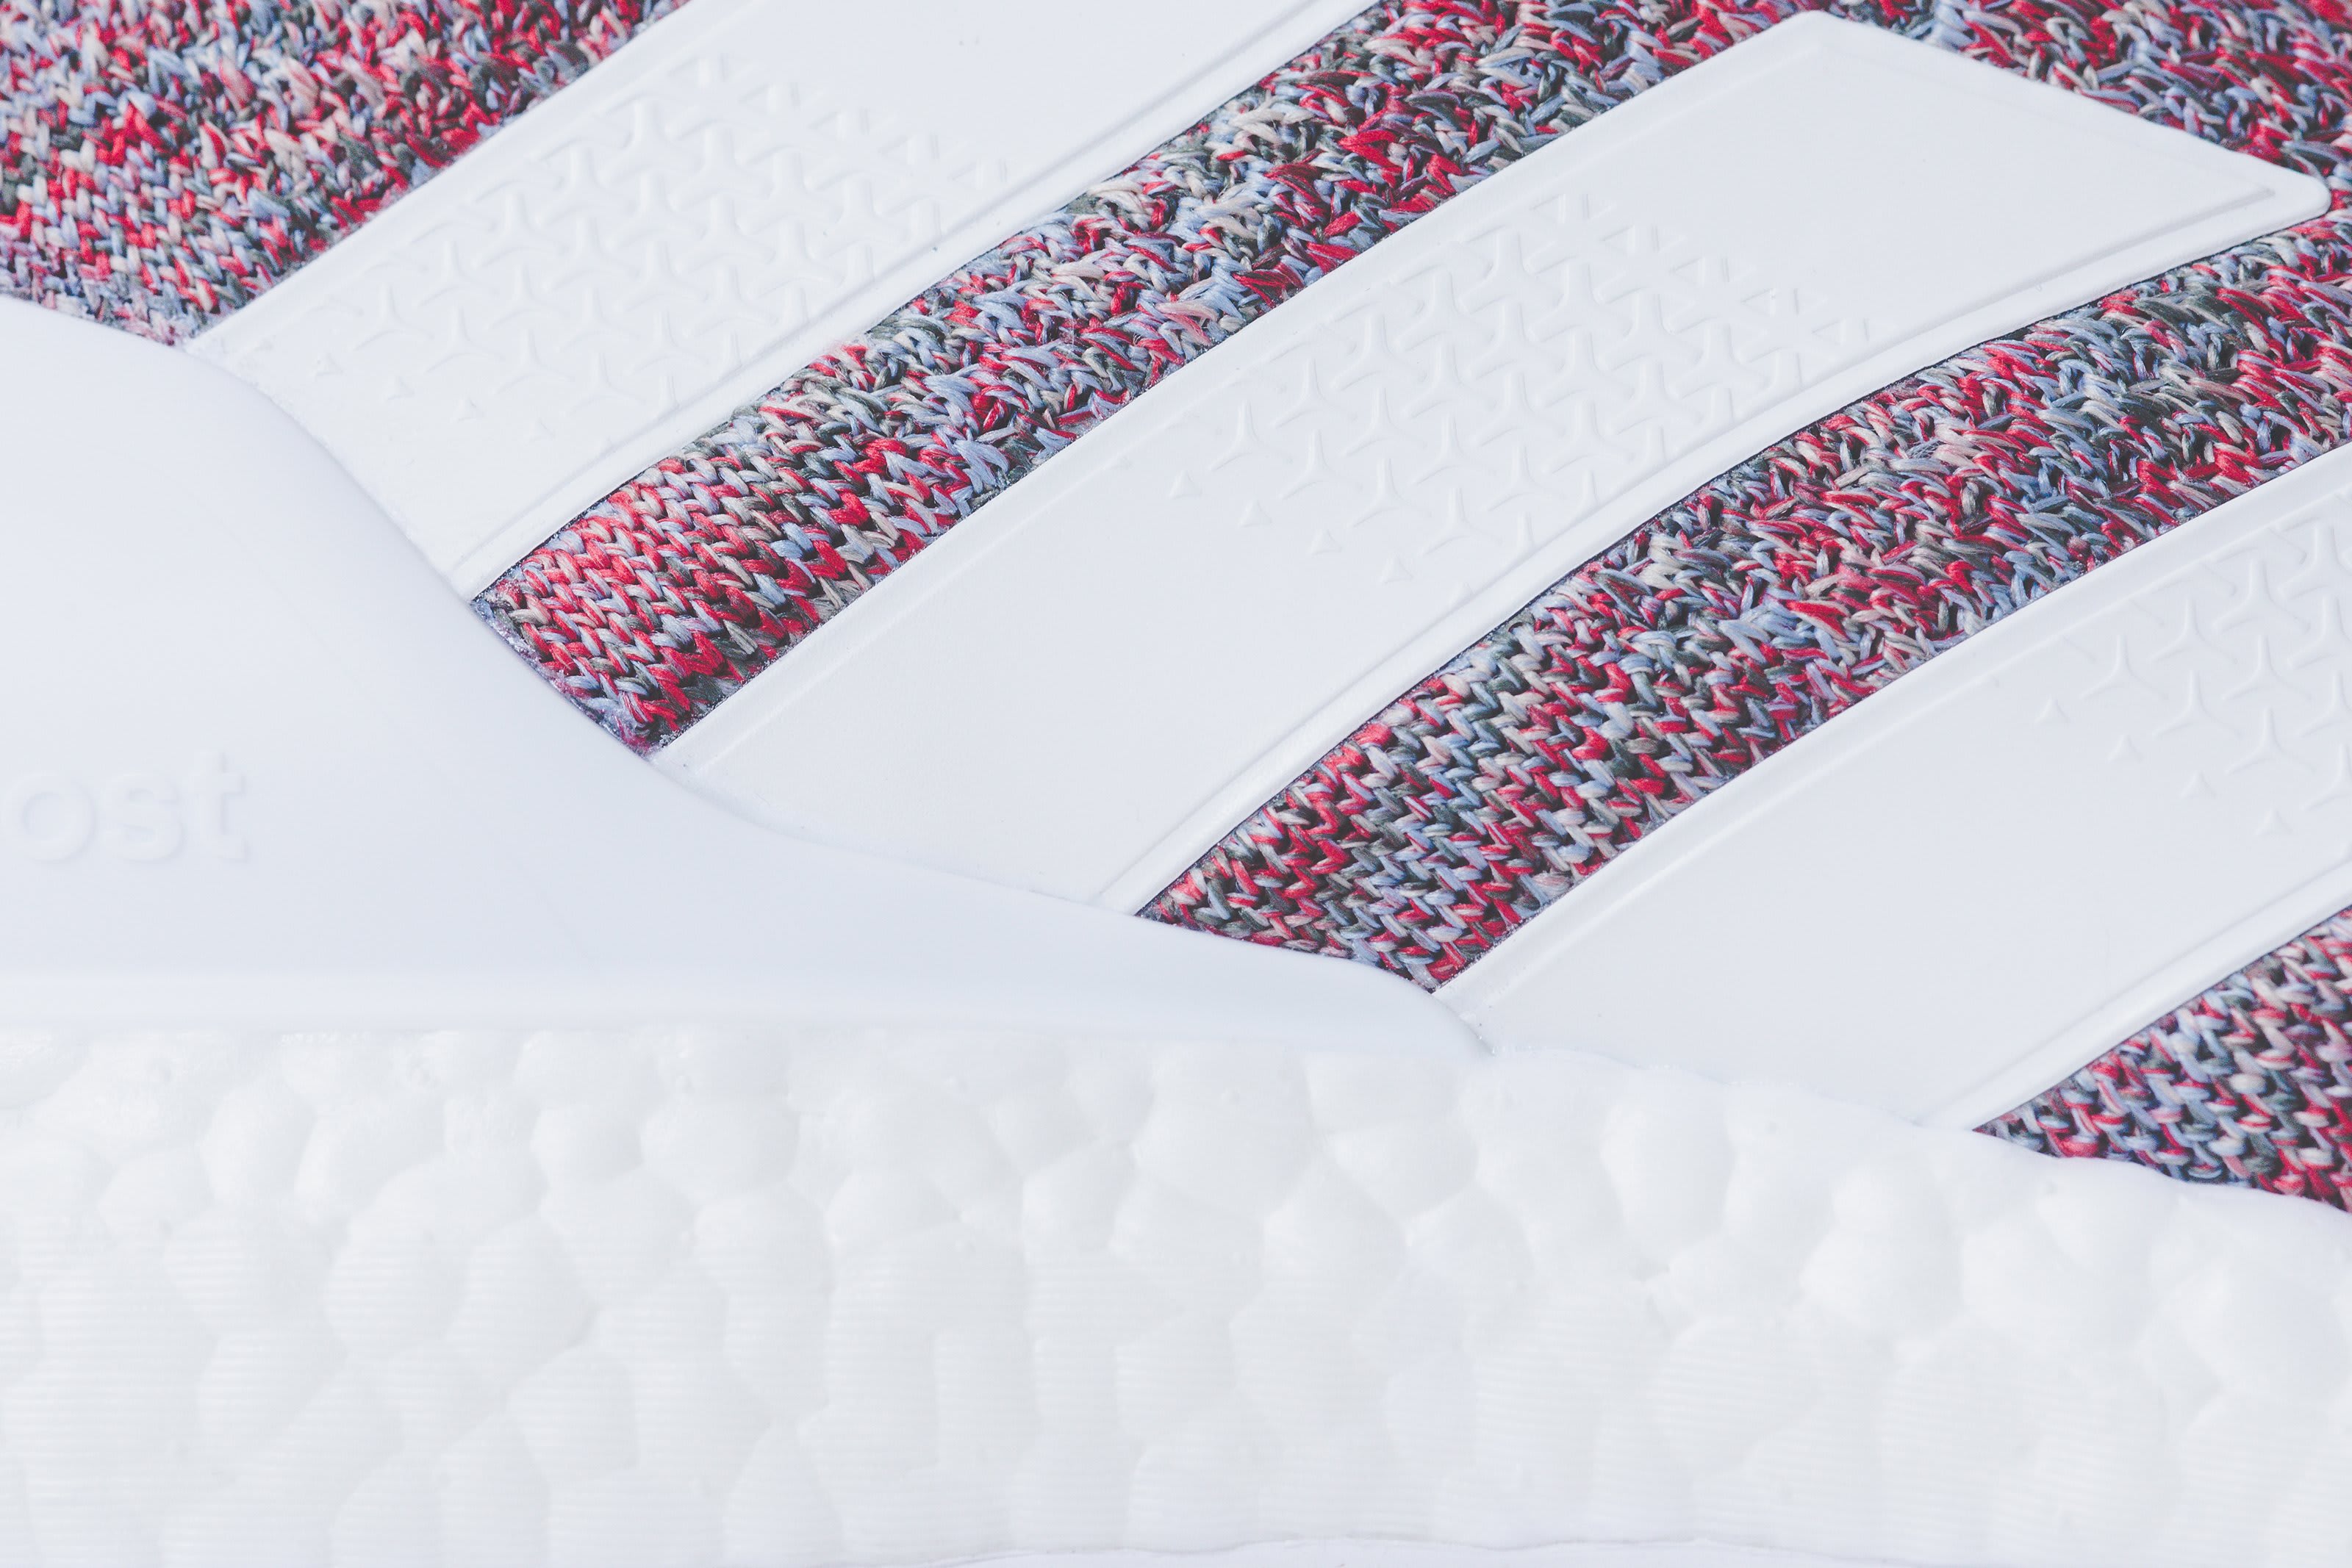 Kith x Adidas Soccer Ace 16+ Purecontrol Ultra Boost (Detail)